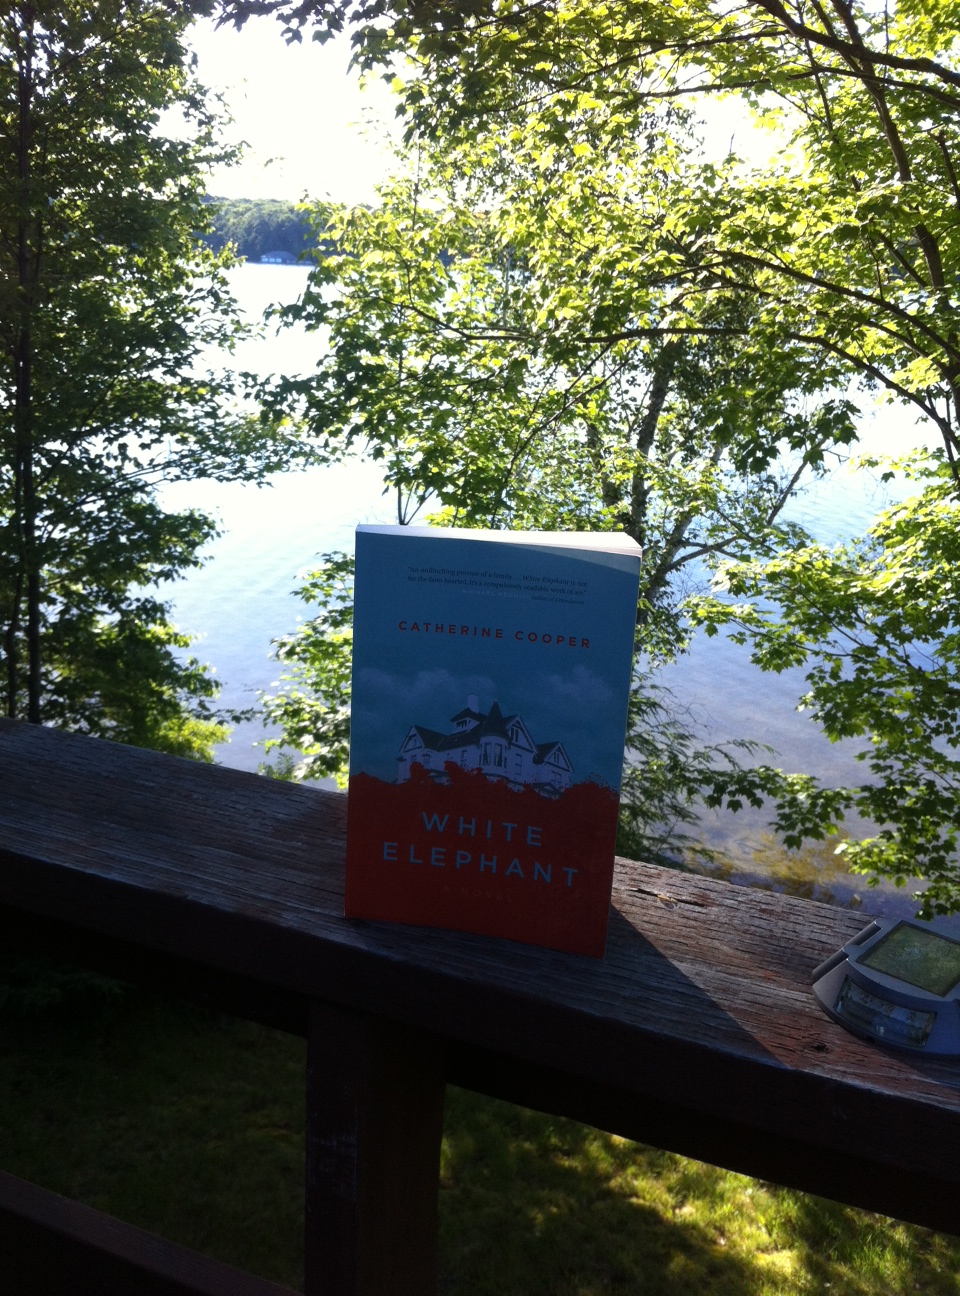 I was lucky enough to read this book in the beautiful setting of Muskoka! Again, no cat accompaniment unfortunately